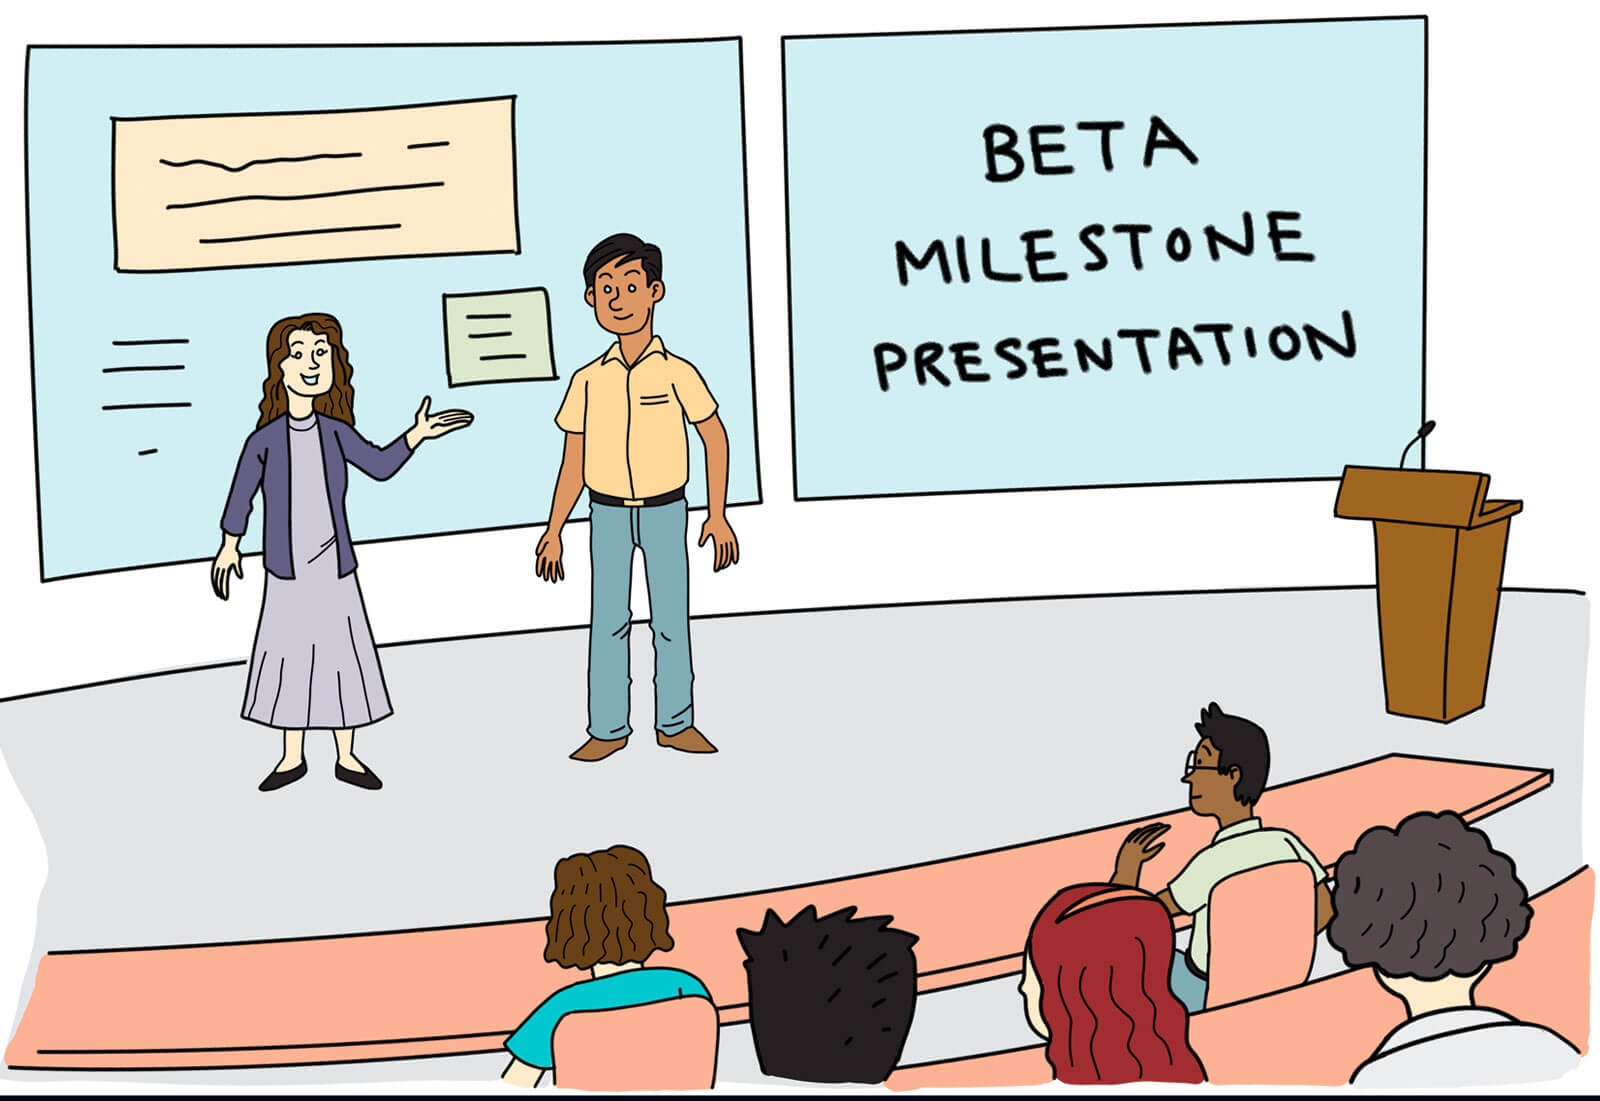 Two students presenting their beta milestone presentation to a group of five other students.